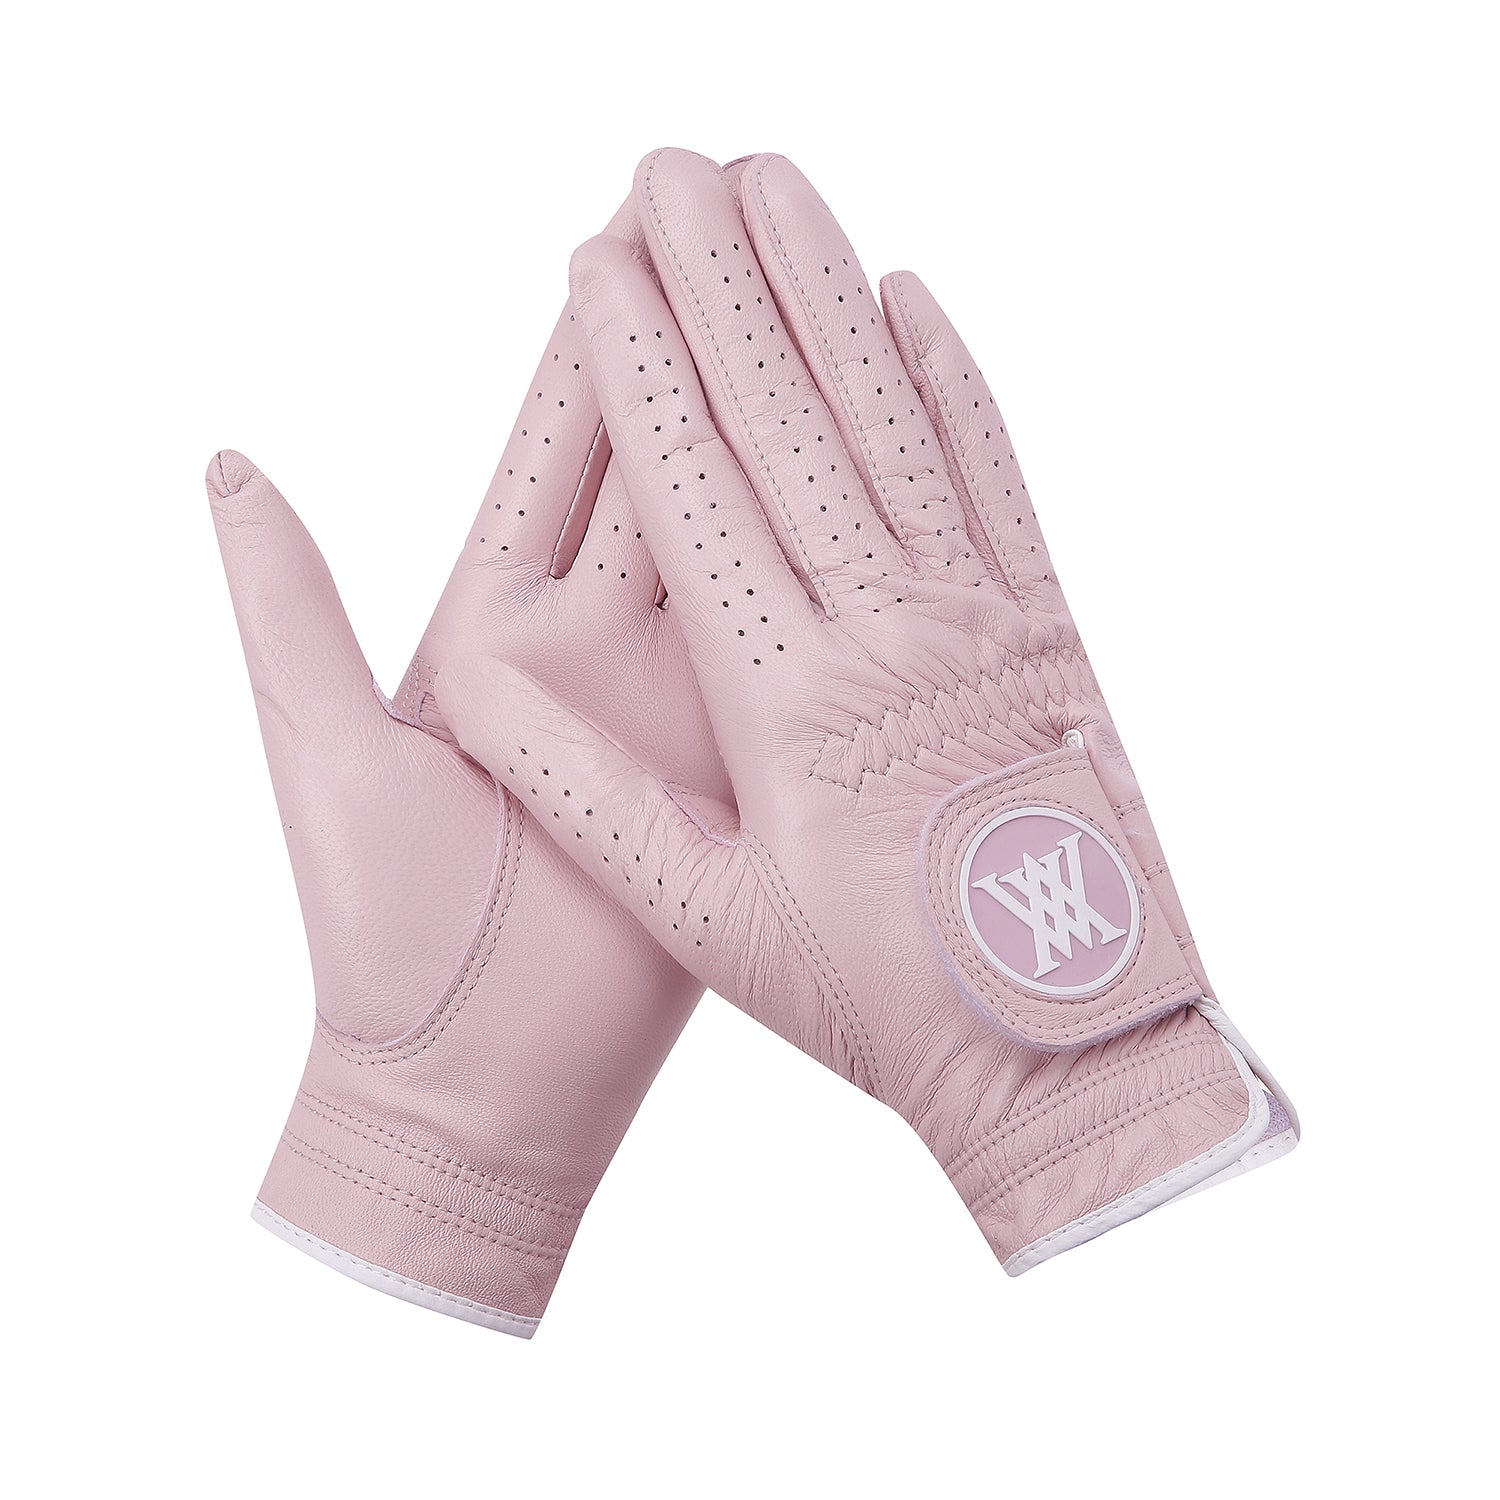 ANEW GOLF Women's Two Hand Solid Gloves